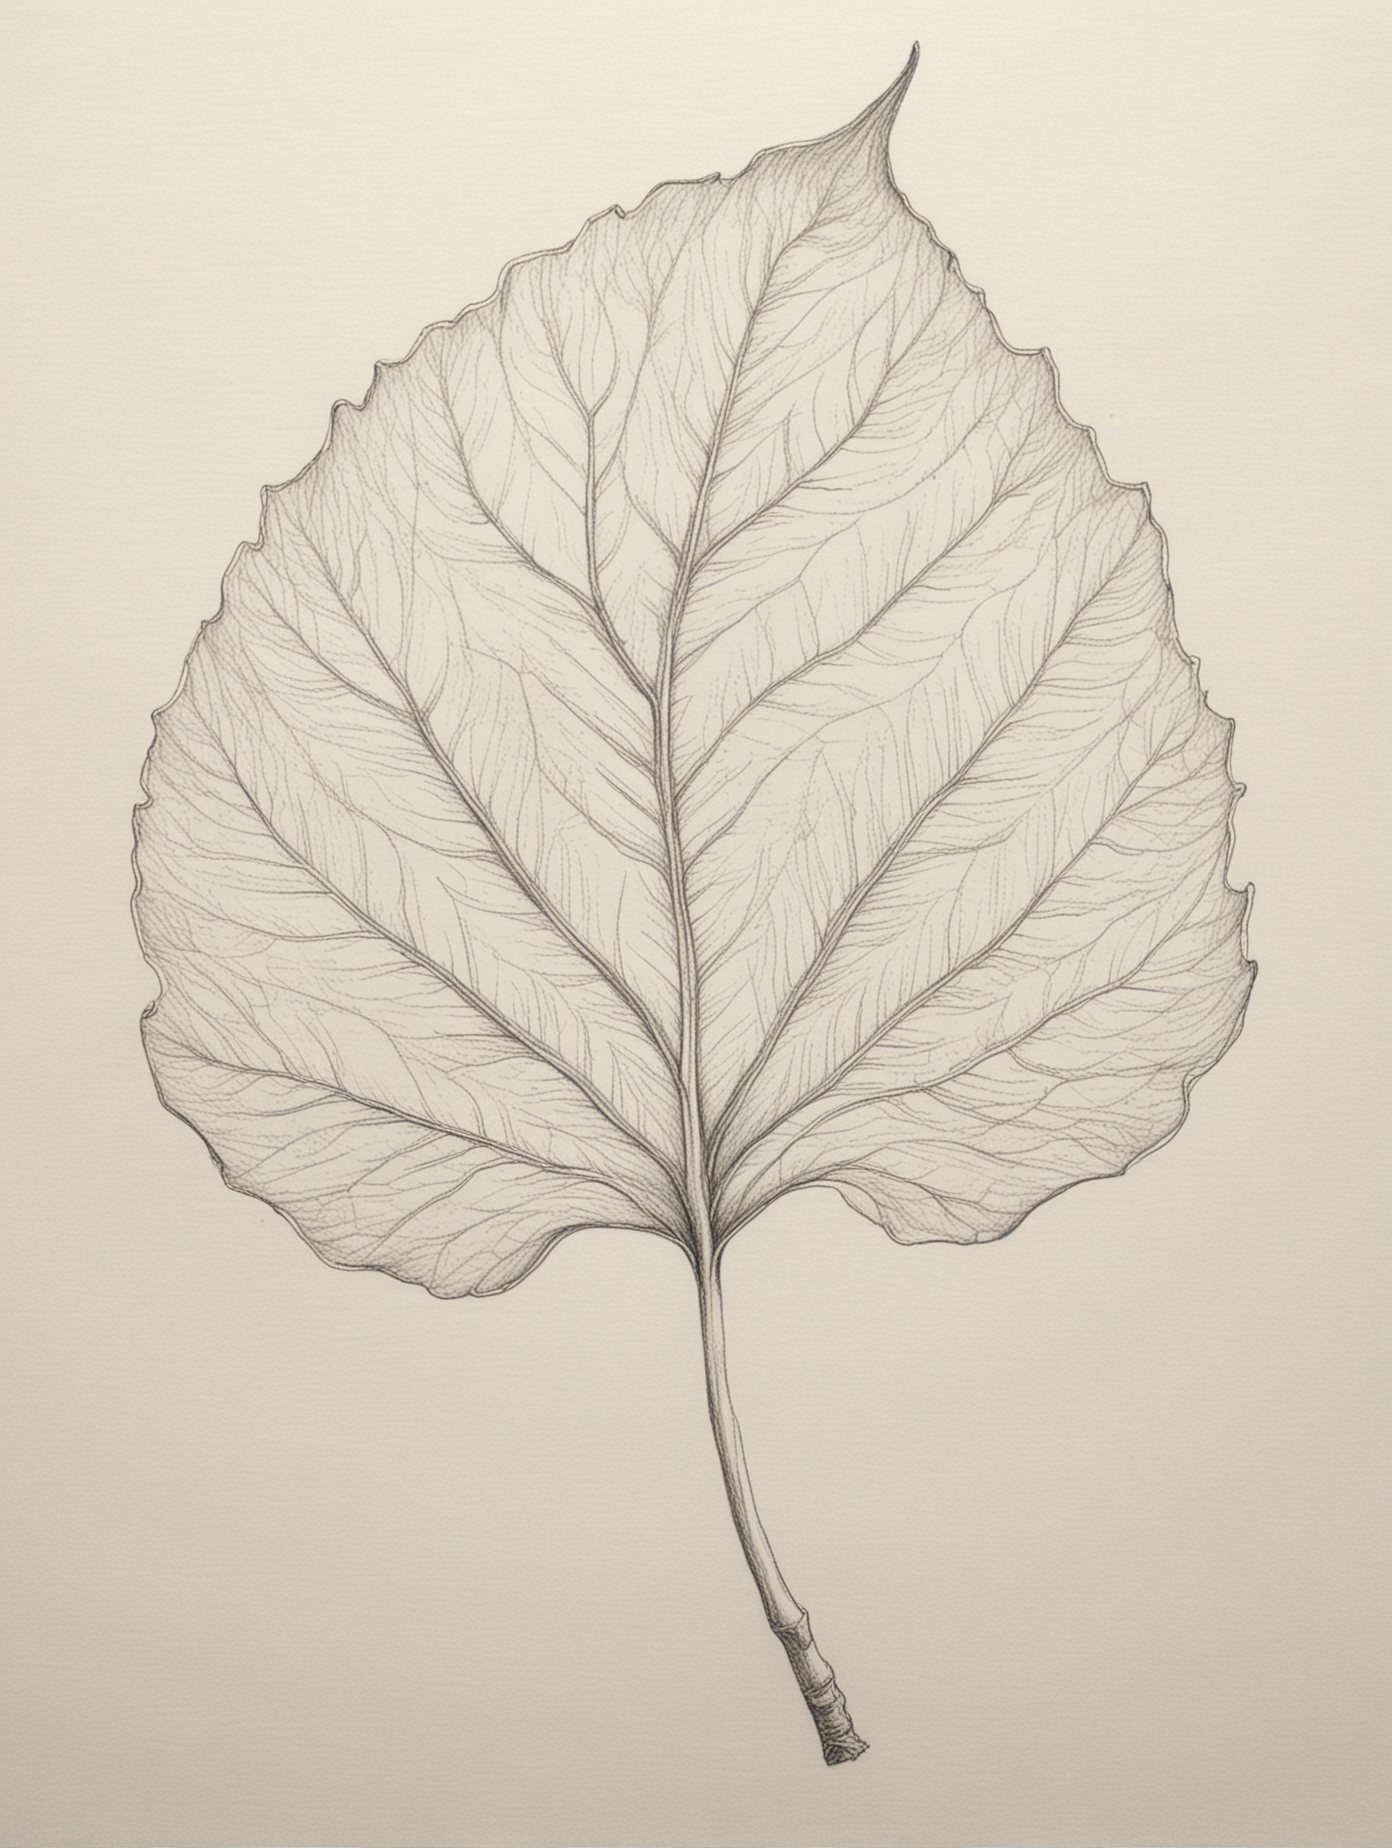 pencil sketch outline of a leaf with a curled edge